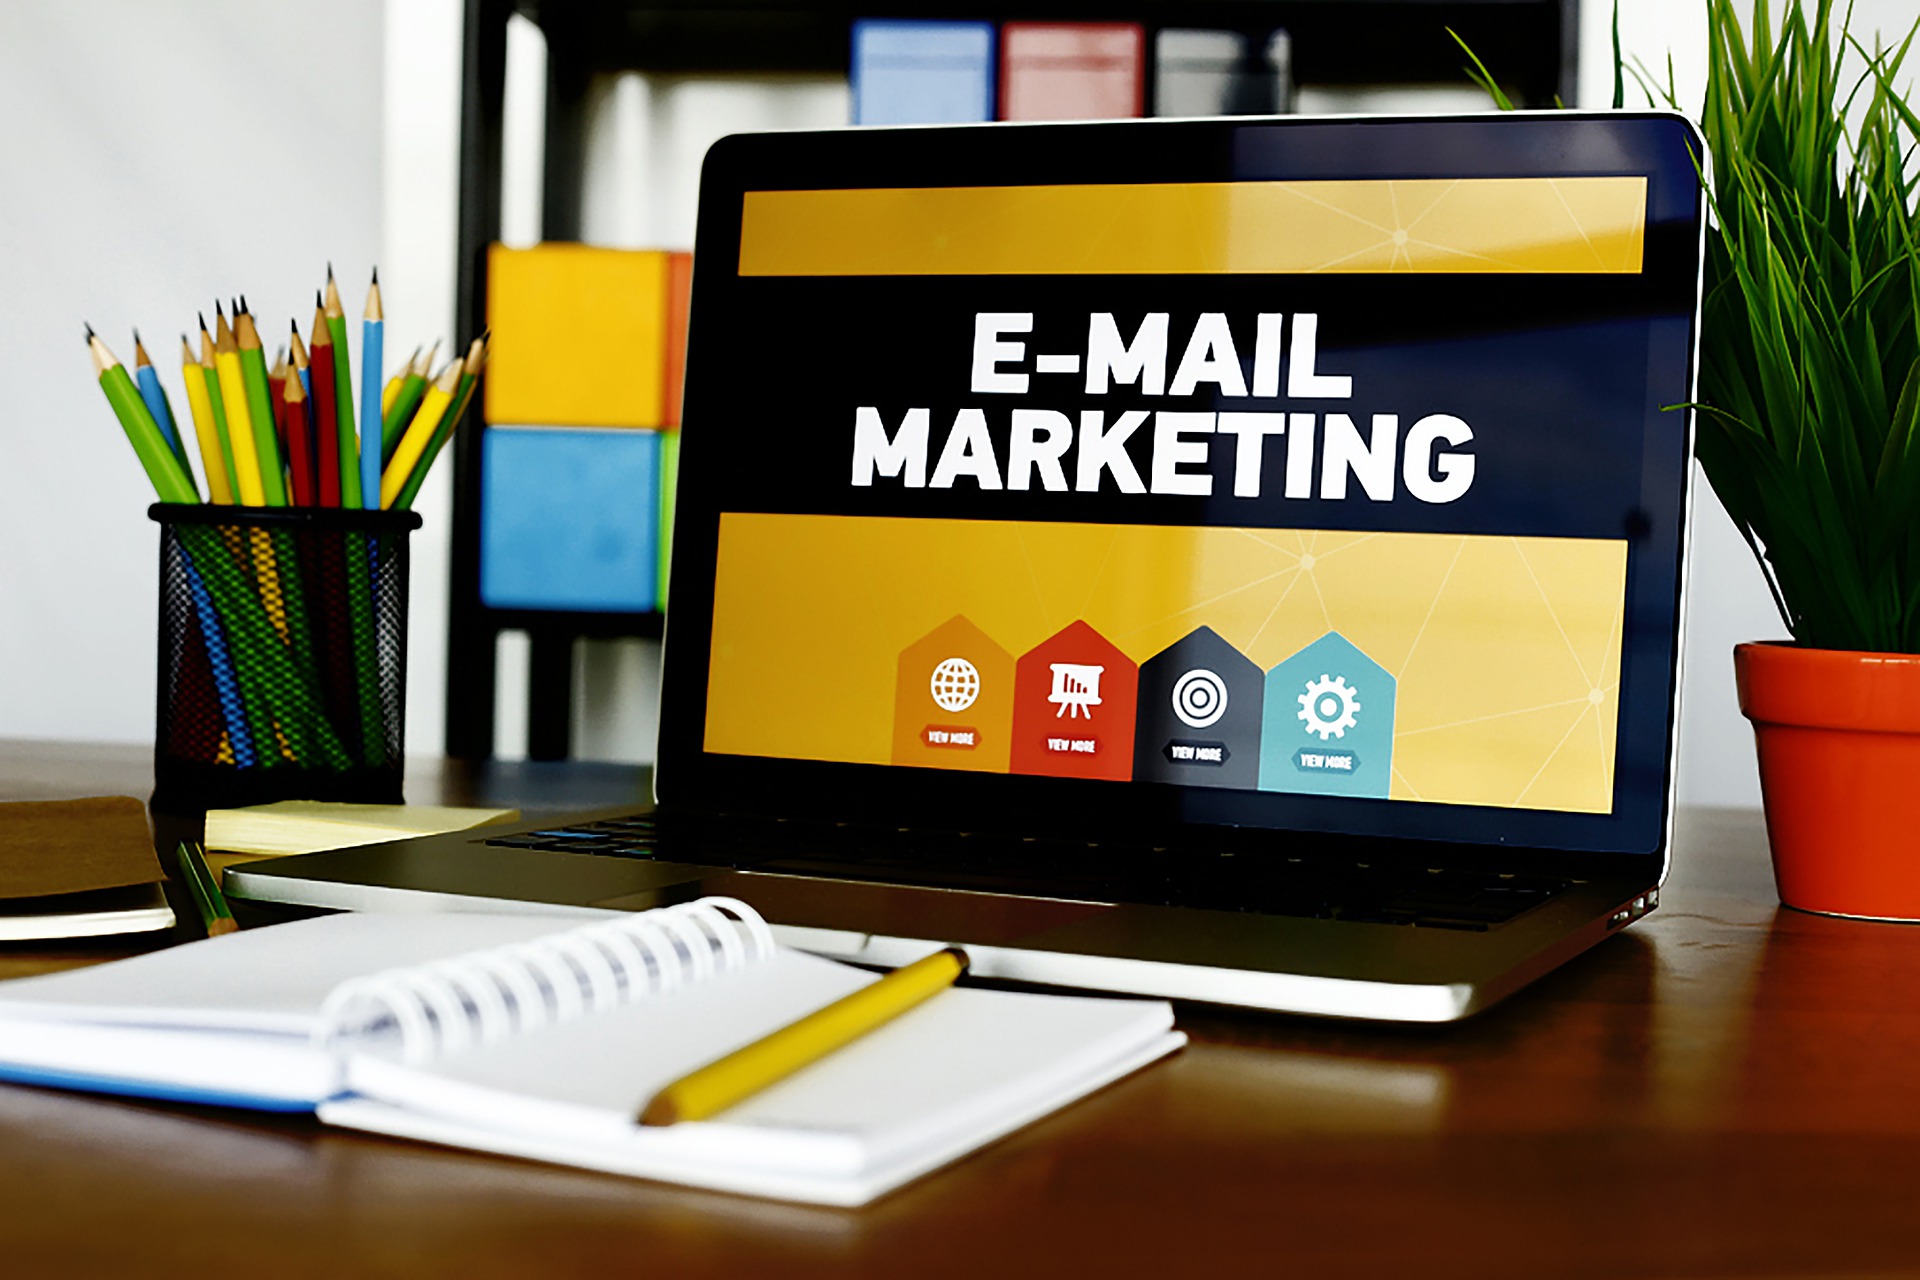 Email Marketing Made Simple